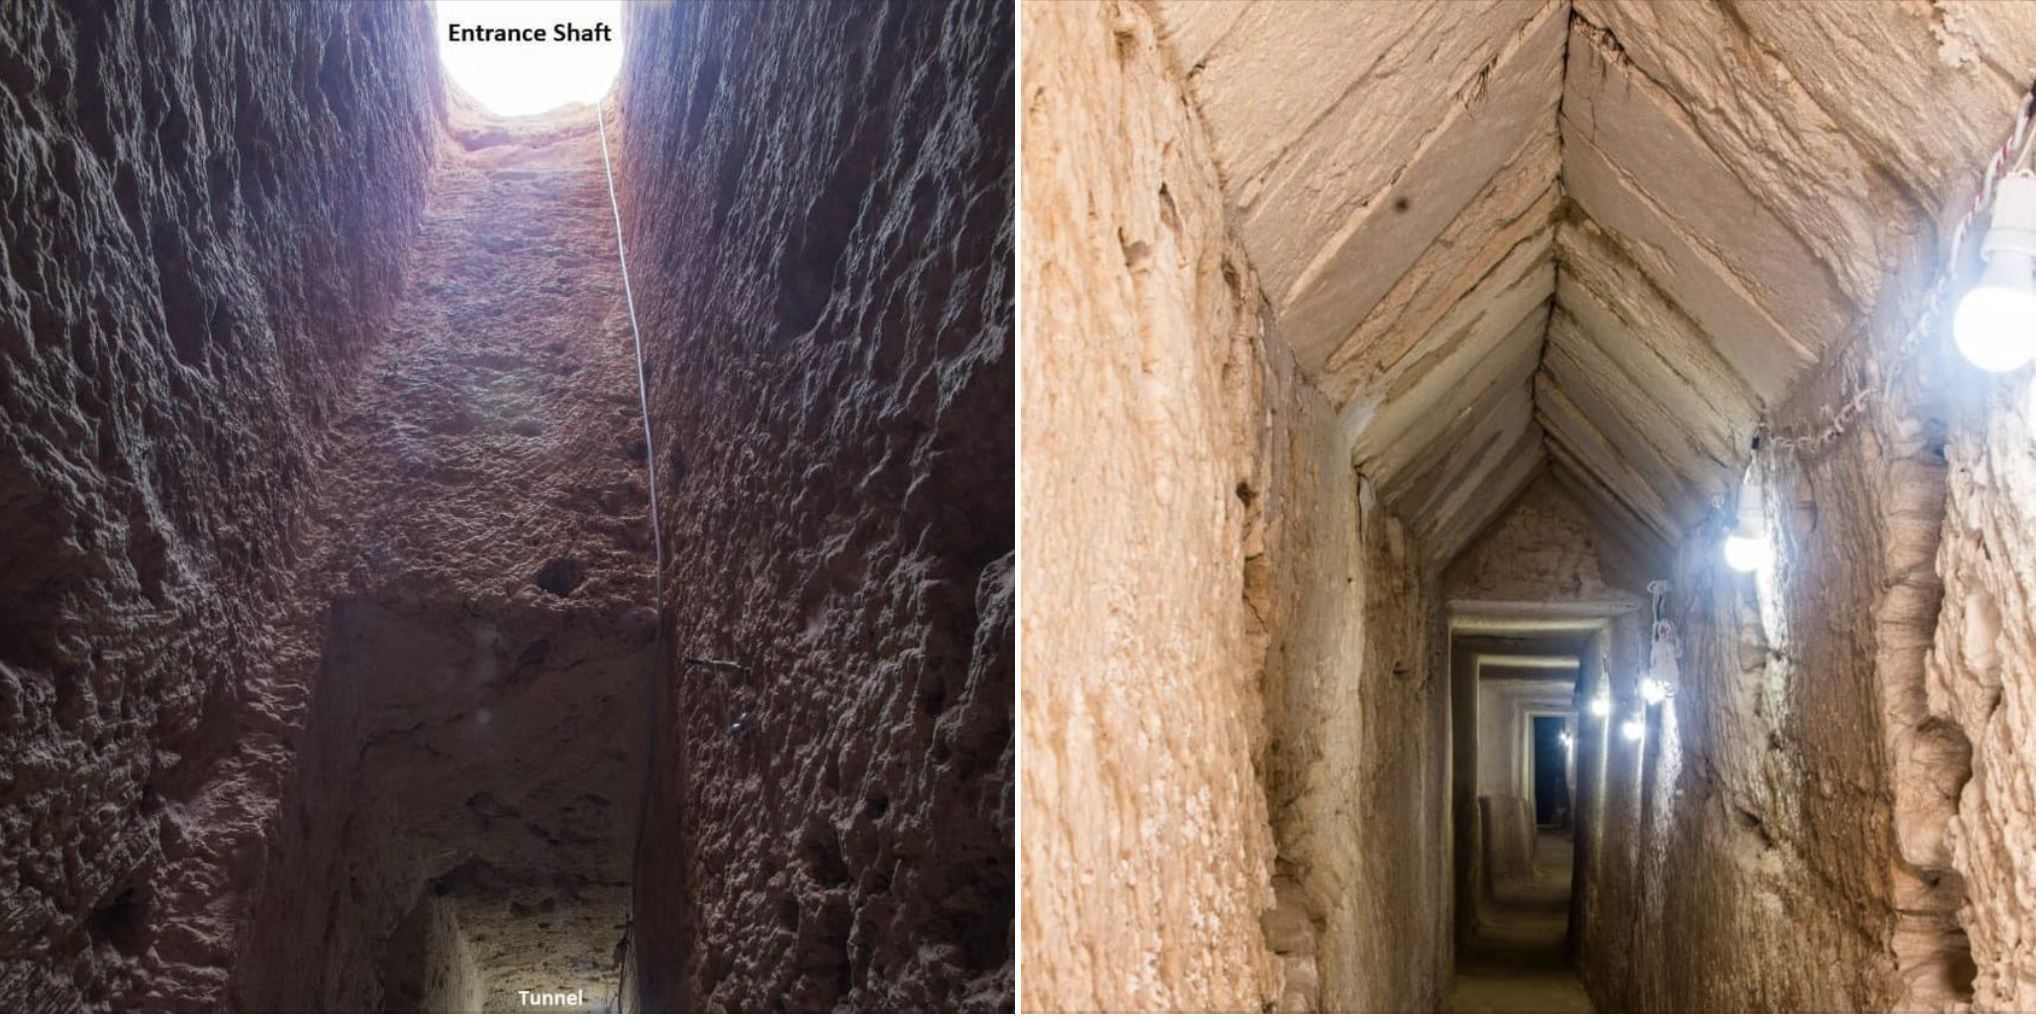 Two photographs showing the underground tunnel recently found at Taposiris Magna. Image Credit: Egyptian Ministry of Antiquities.